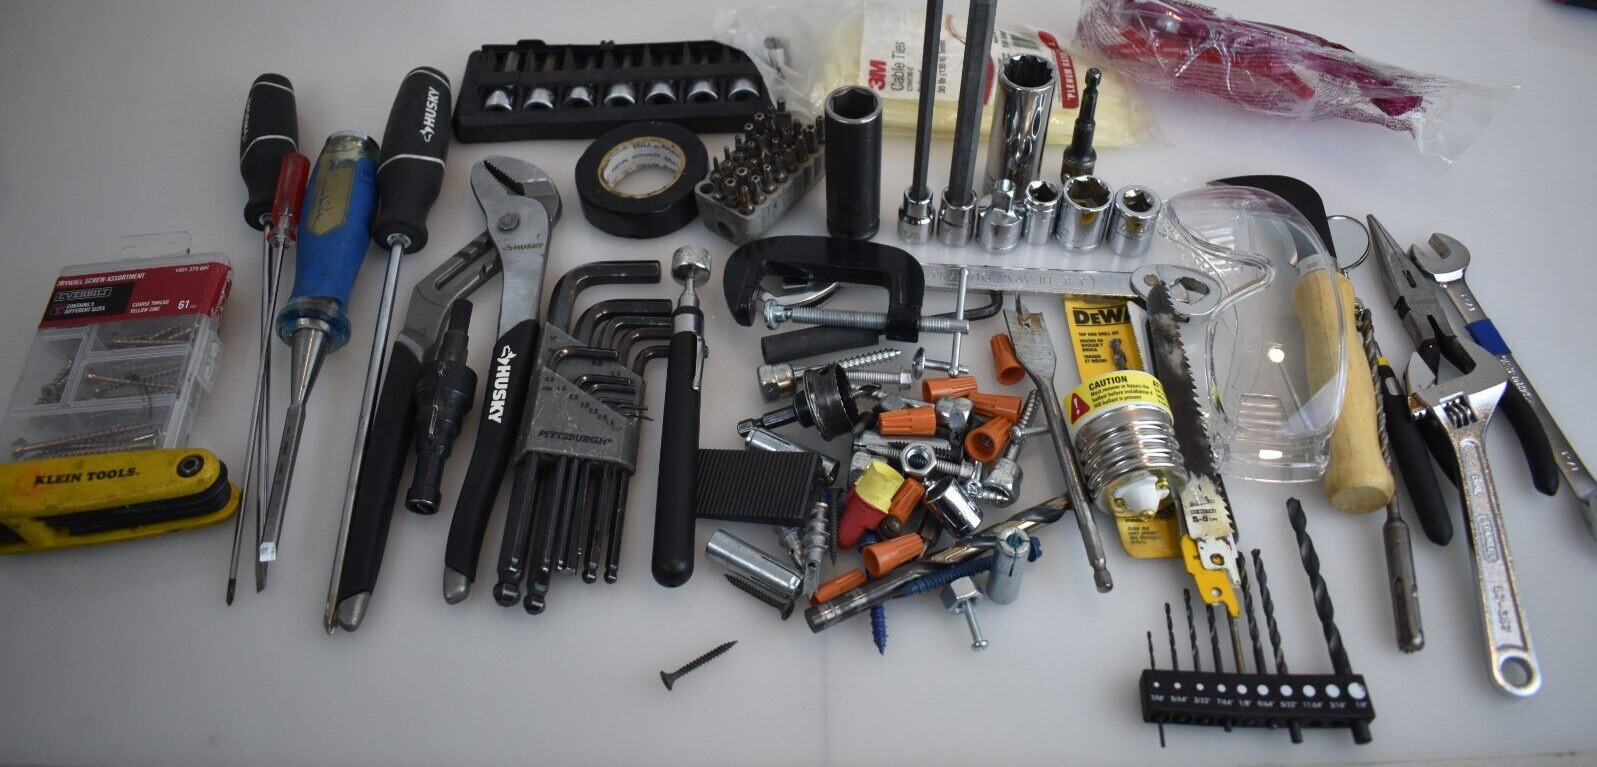 Large beginner Tool Lot Sockets, Wrenches, Pliers, Screwdrivers, and more